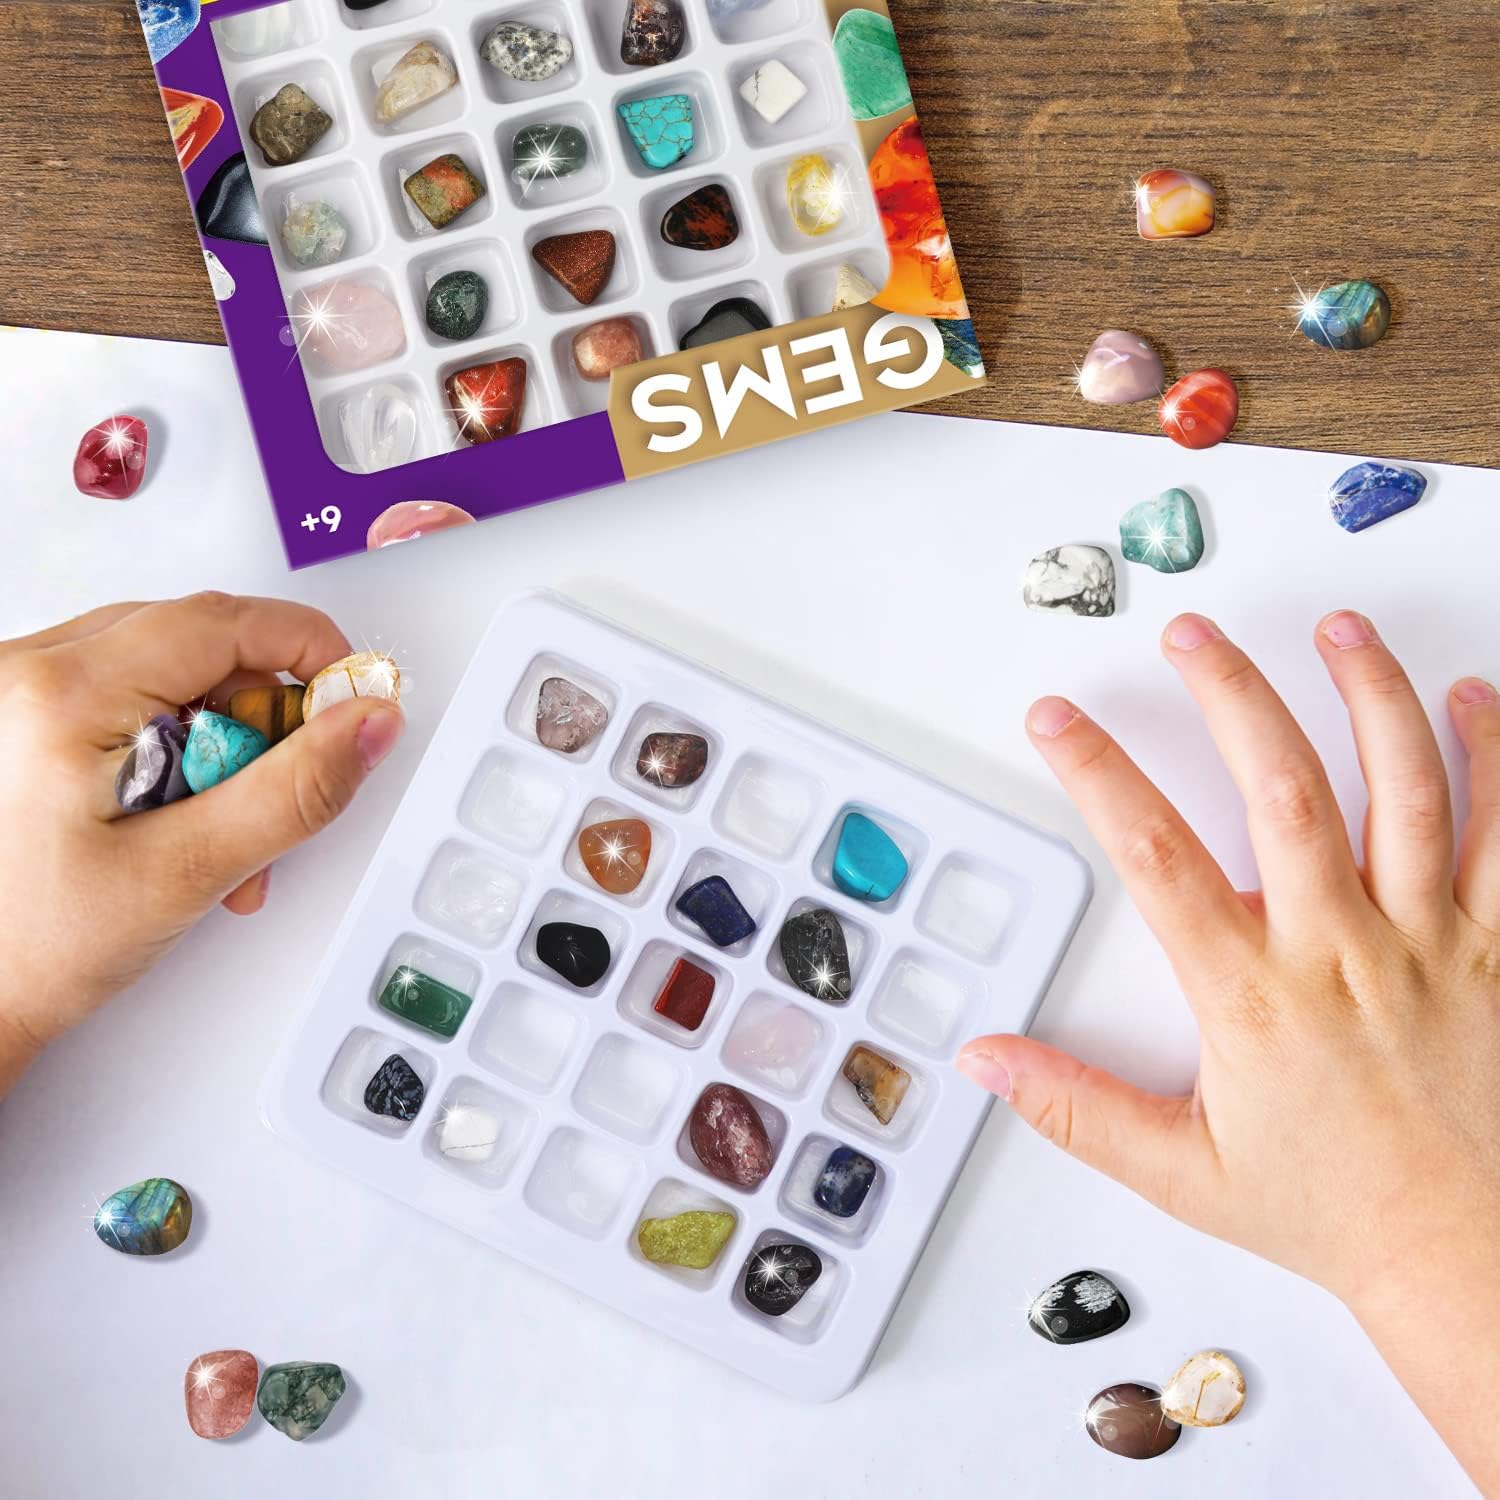 Eduman Byncceh Rock Collection Box for Kids - 25 Unique Gemstones- Educational Science Kit